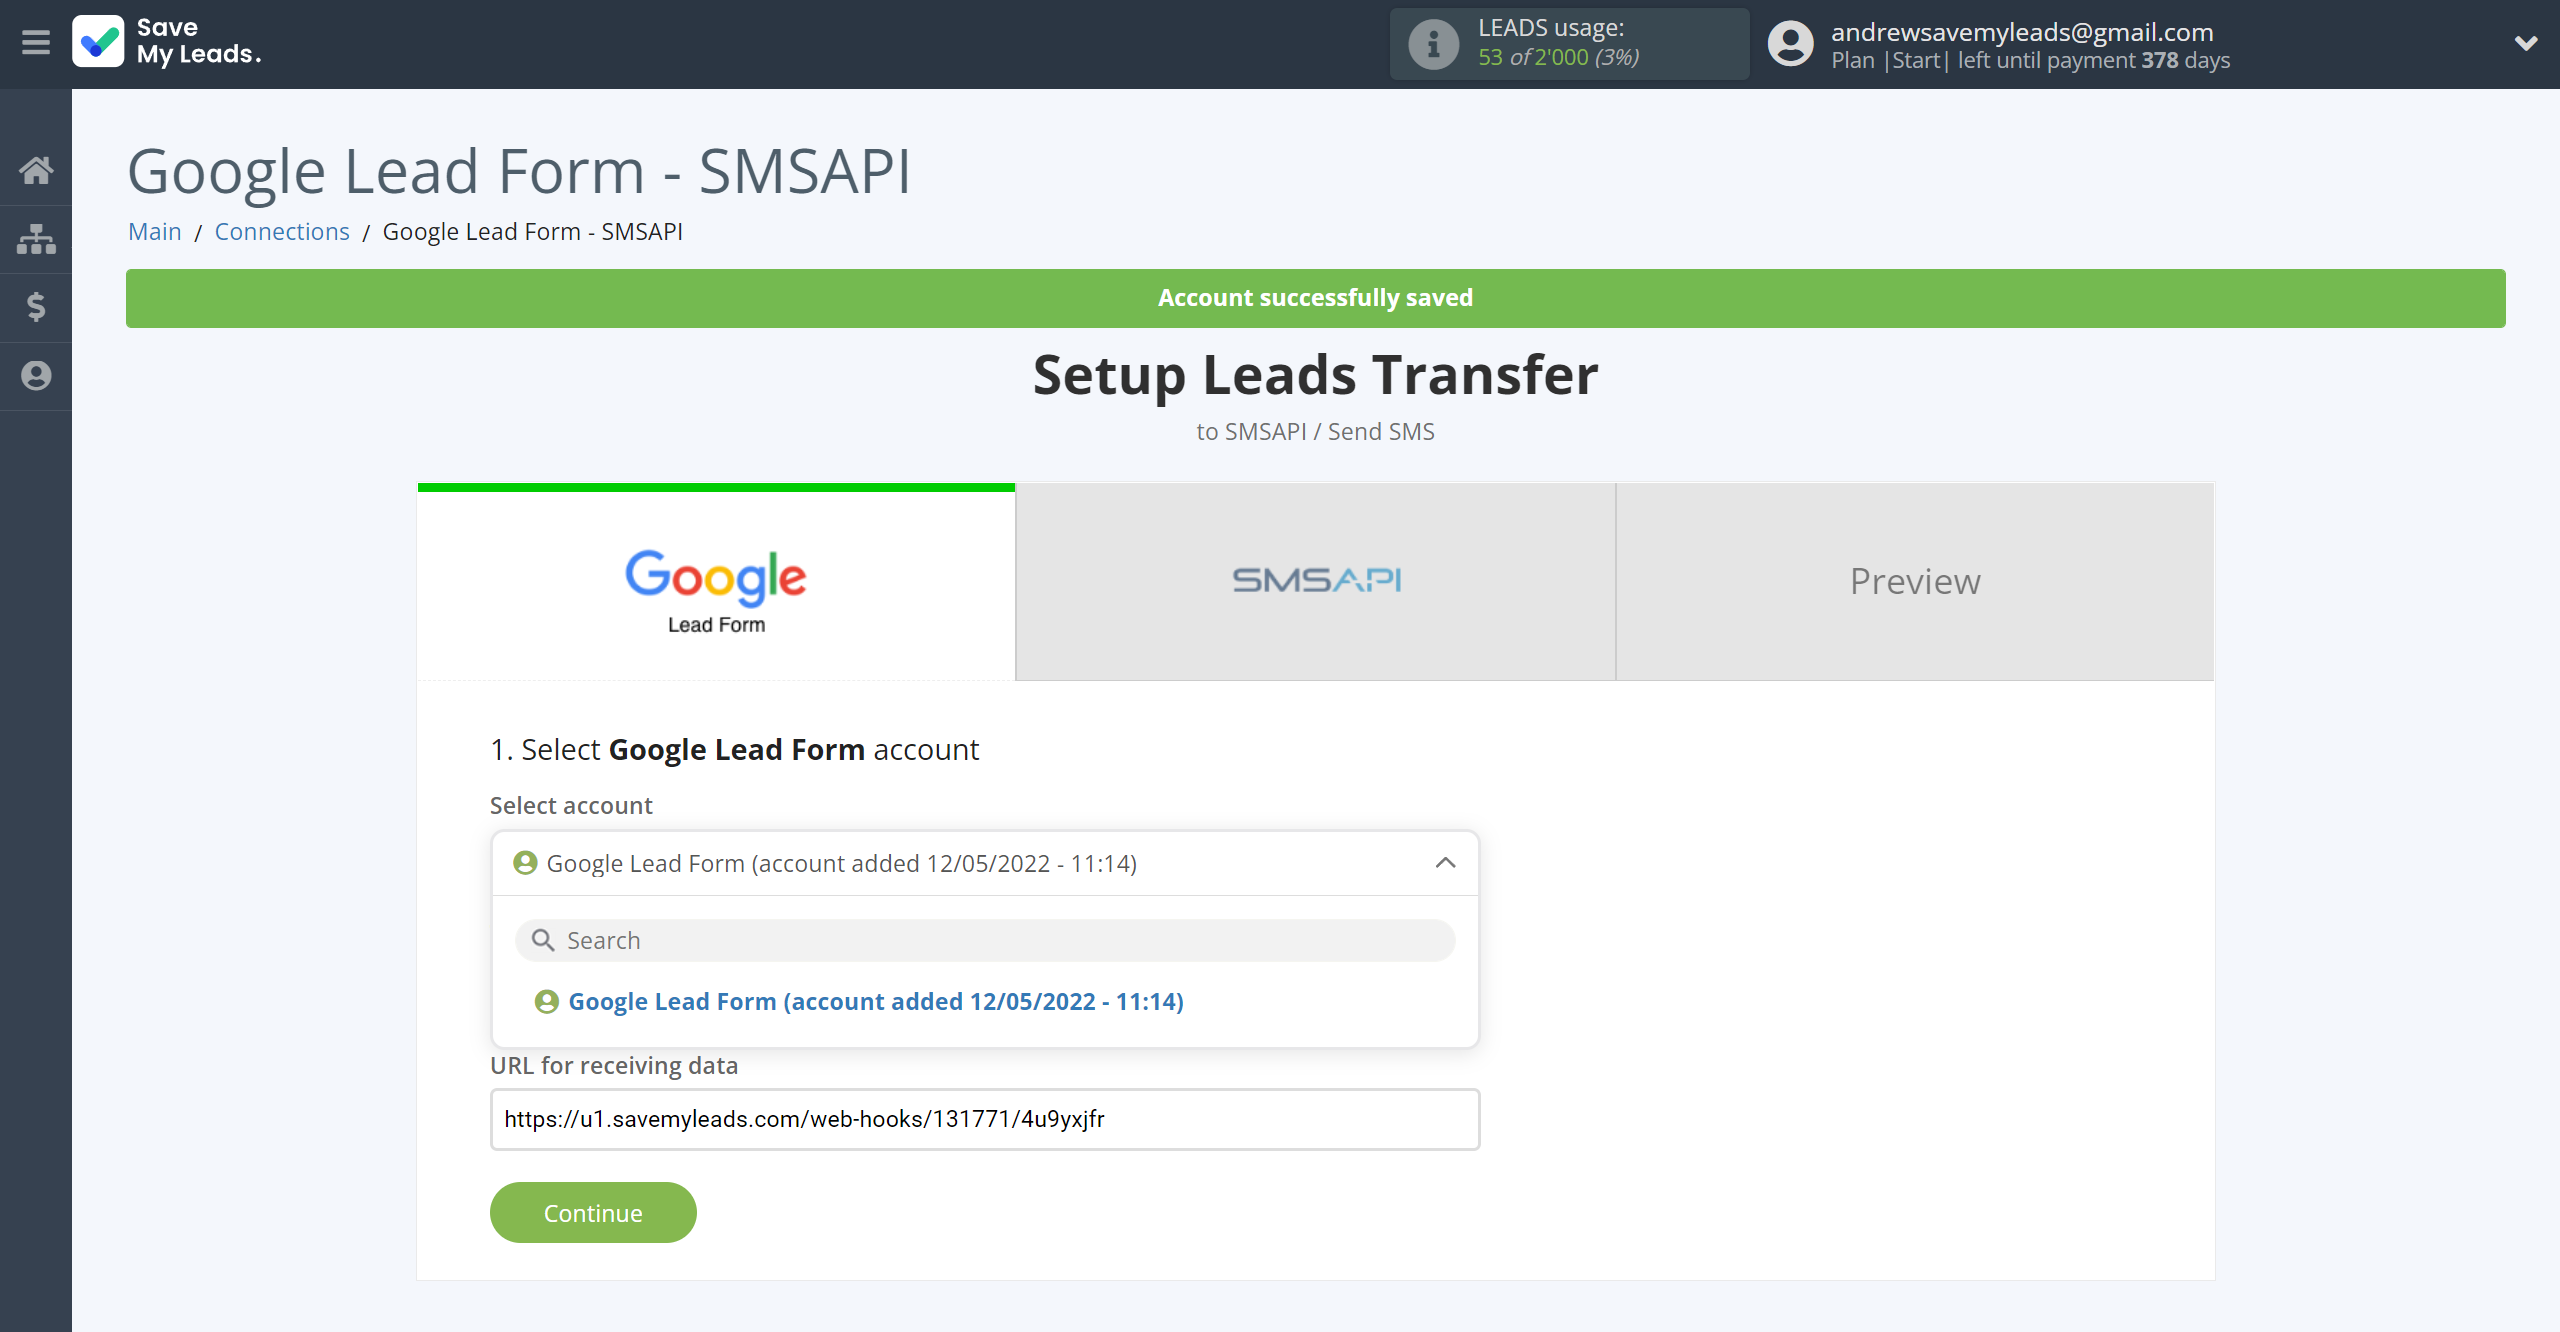 How to Connect Google Lead Form with SMSAPI | Data Source account selection